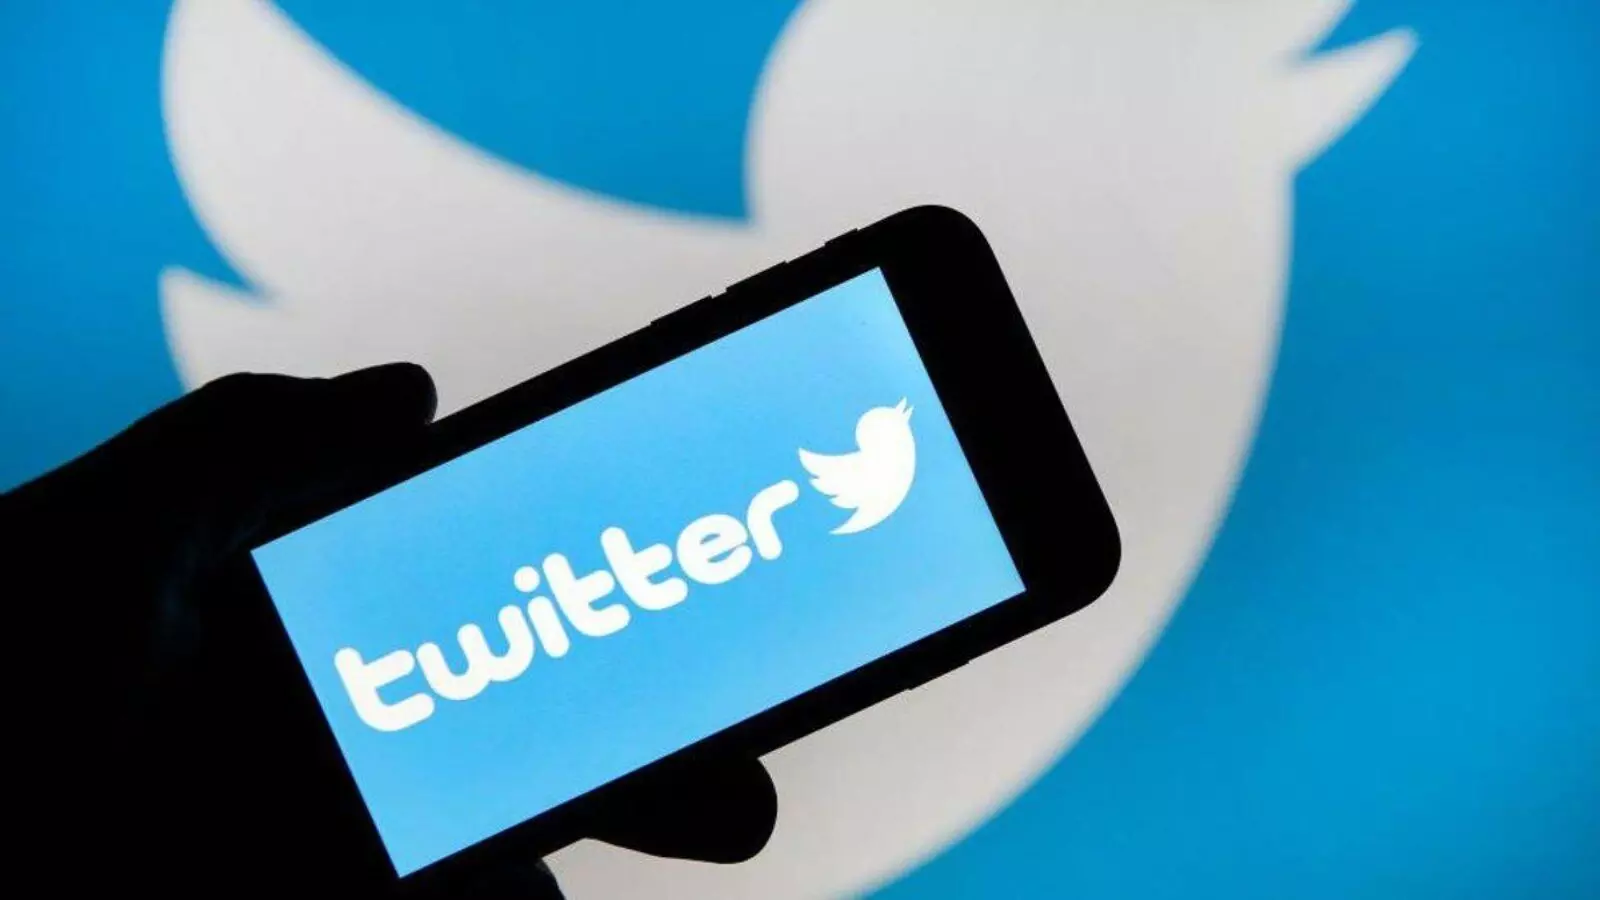 Twitter is becoming more easy like updates watching videos